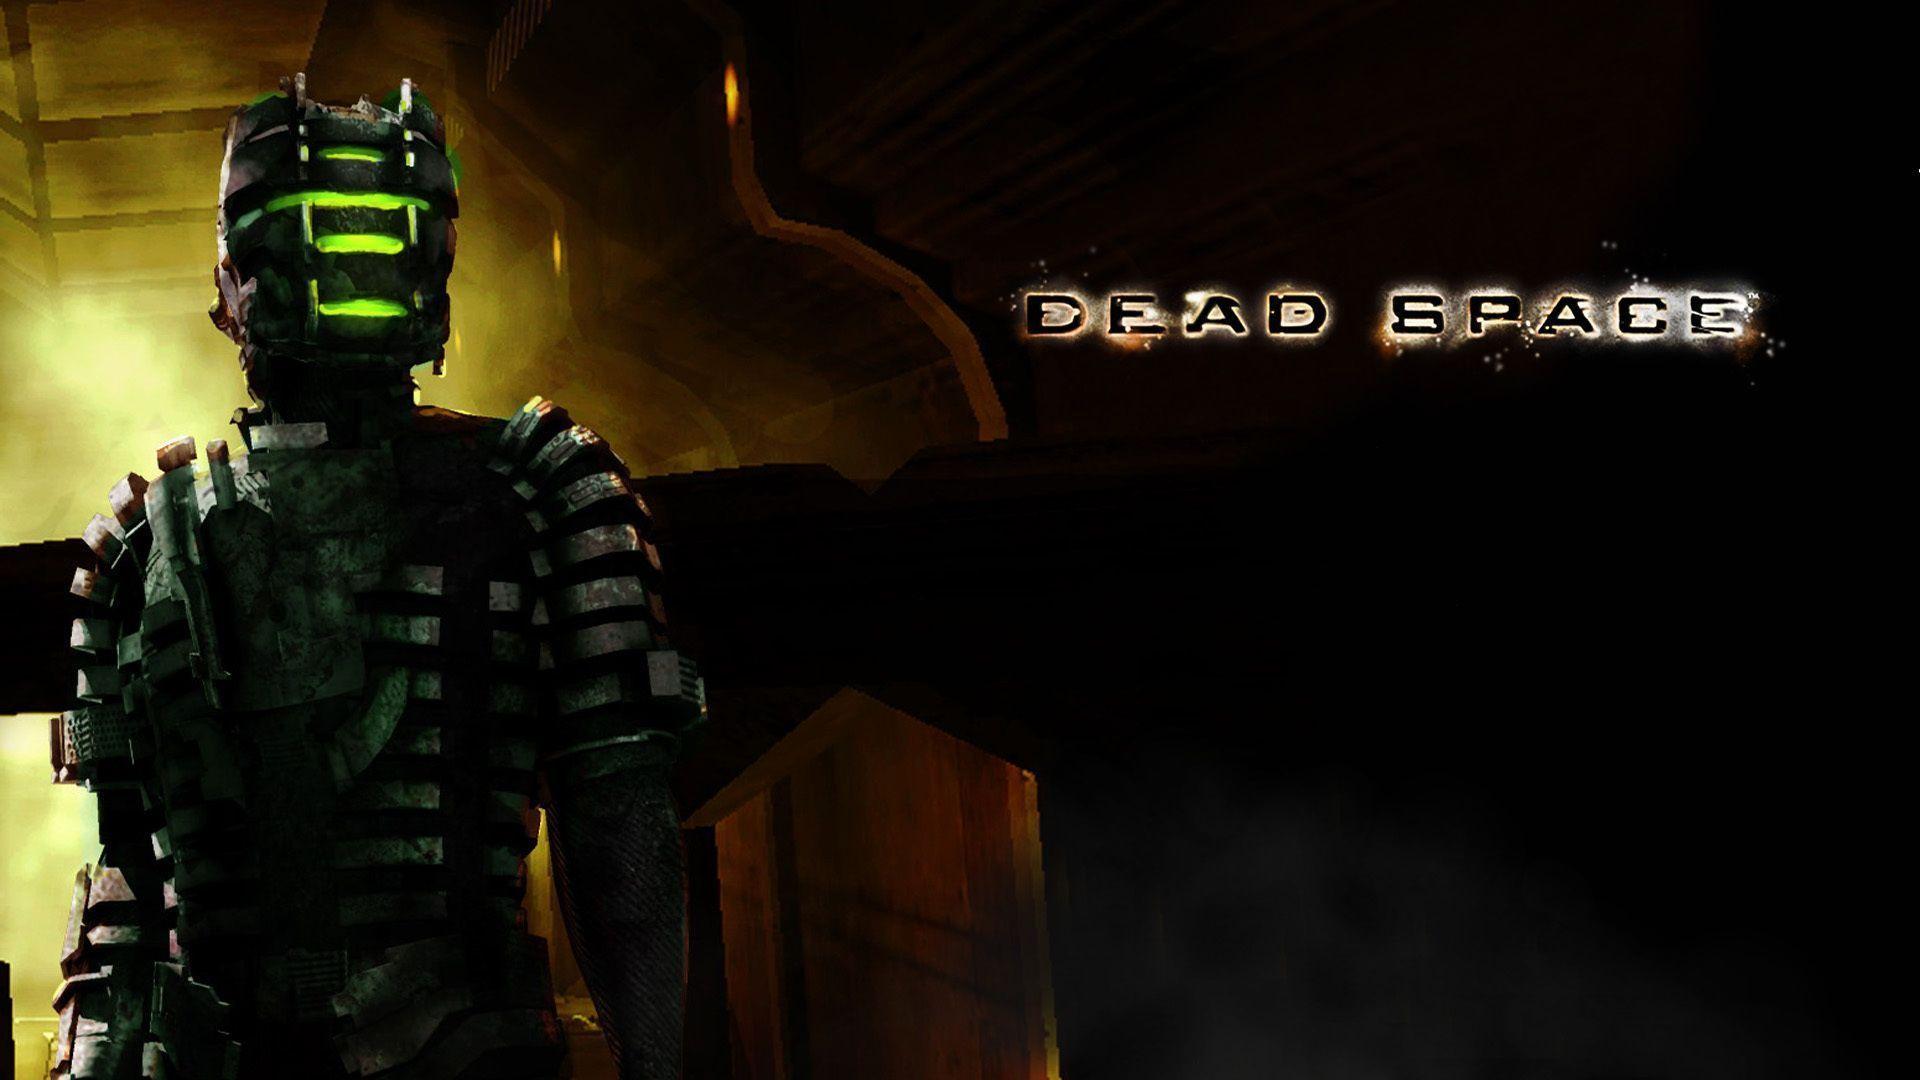 Dead Space Background Wallpaper 57479 High Resolution. download